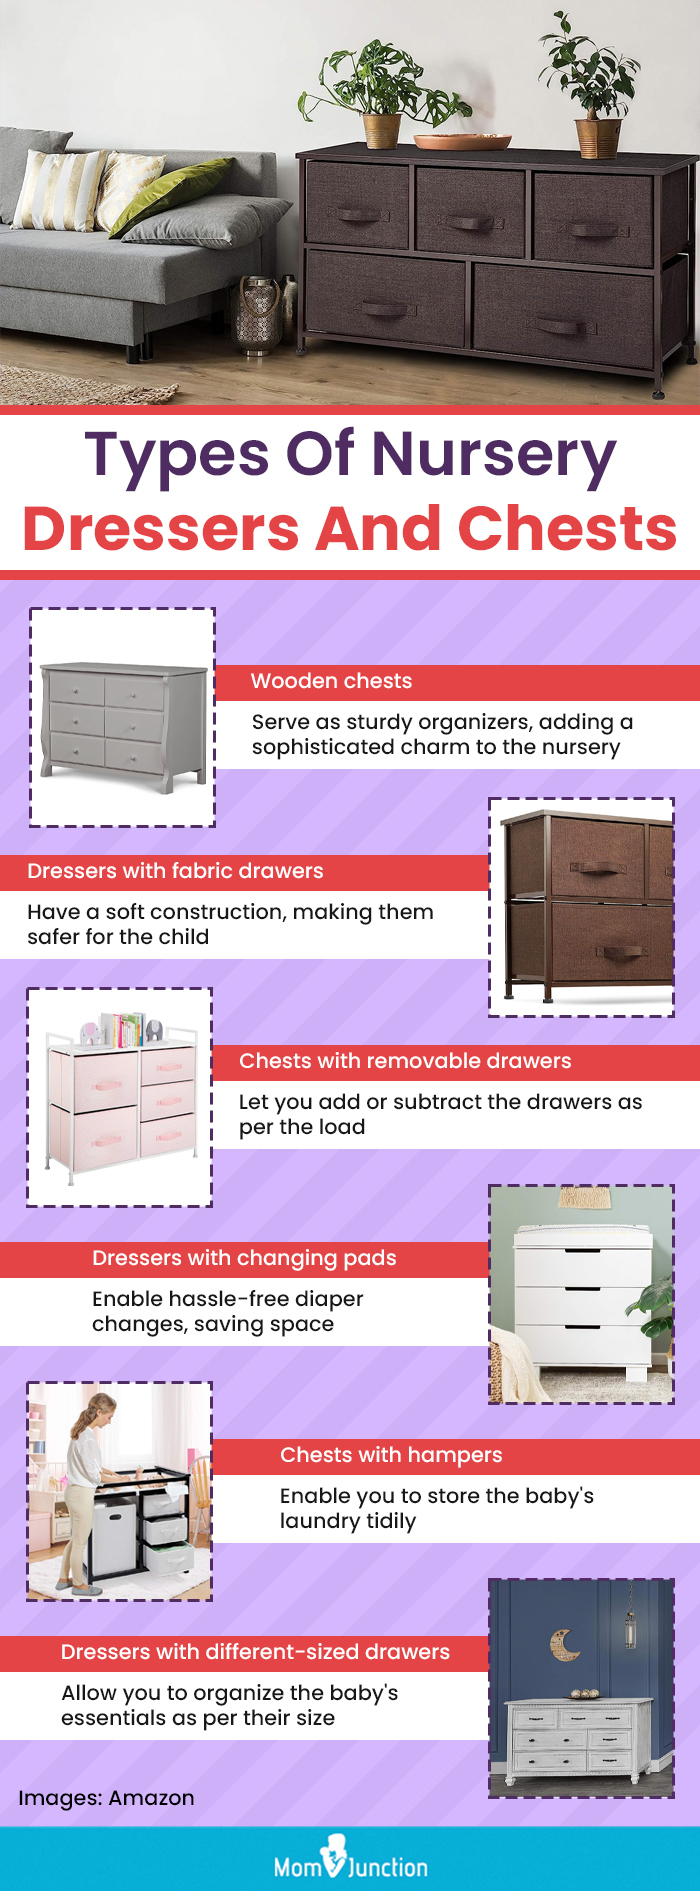 Types Of Nursery Dressers And Chests (infographic)